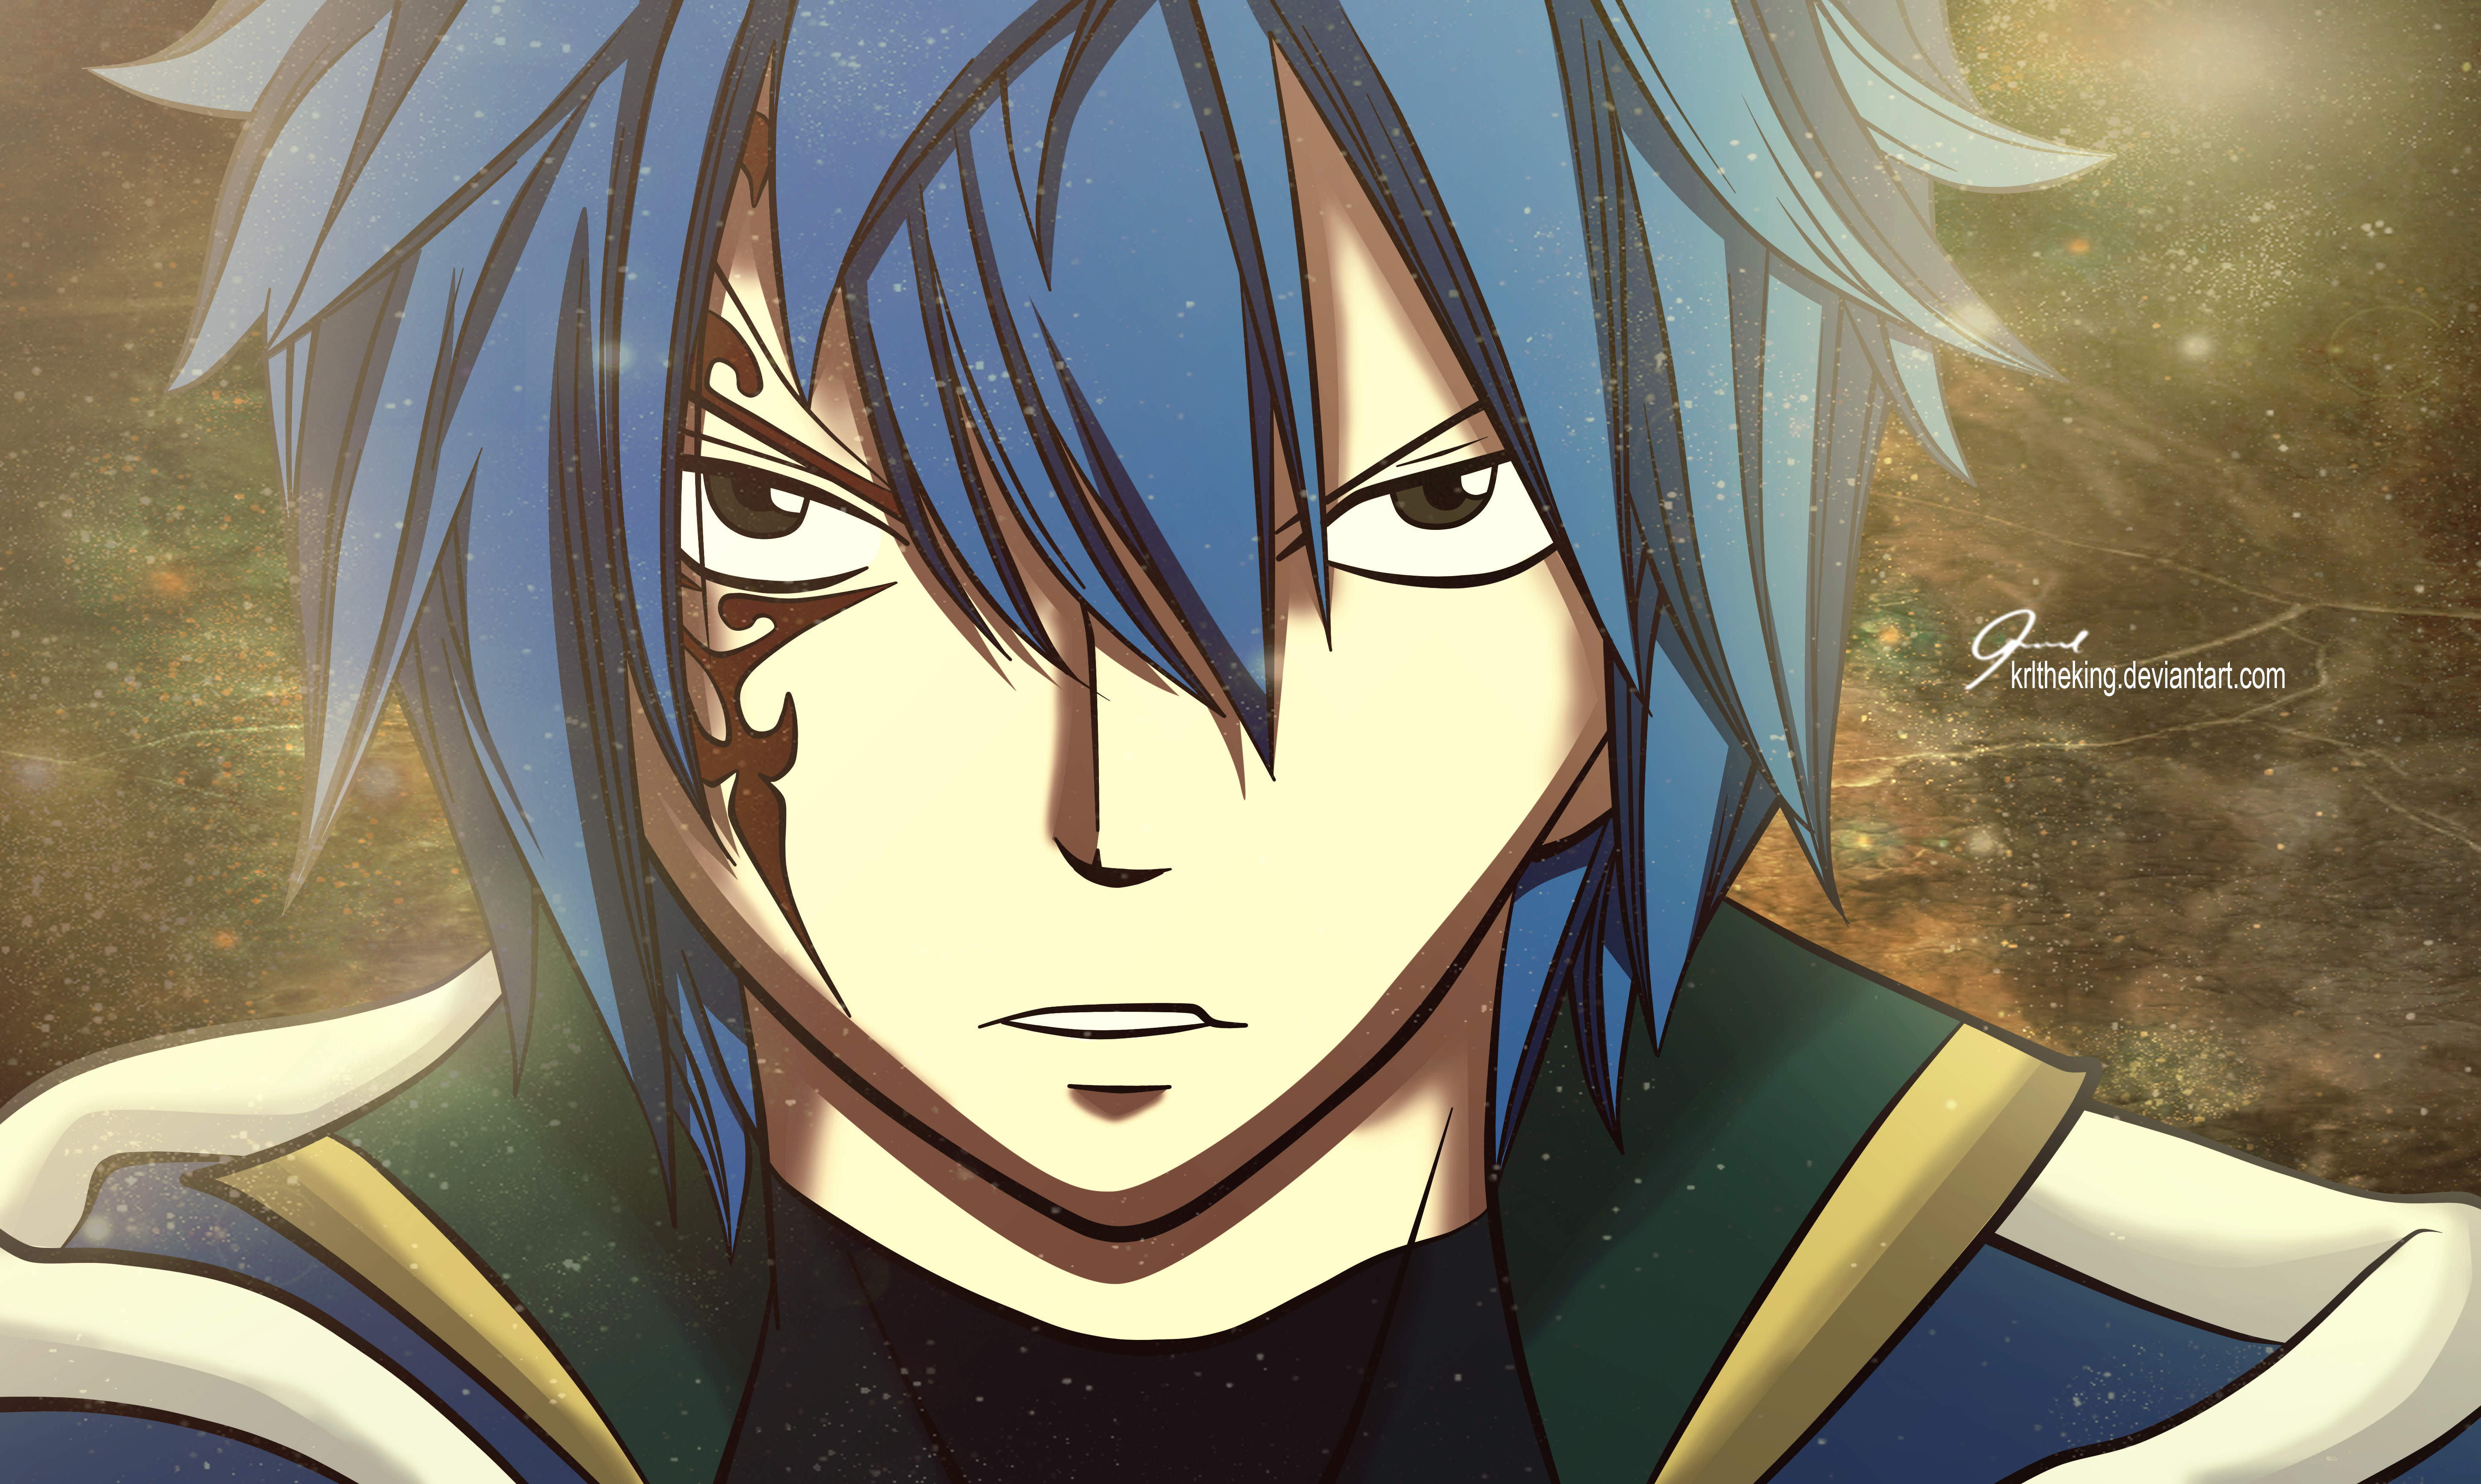 Jellal SMASH. -- Jellal Fernandes Render by annaeditions24 